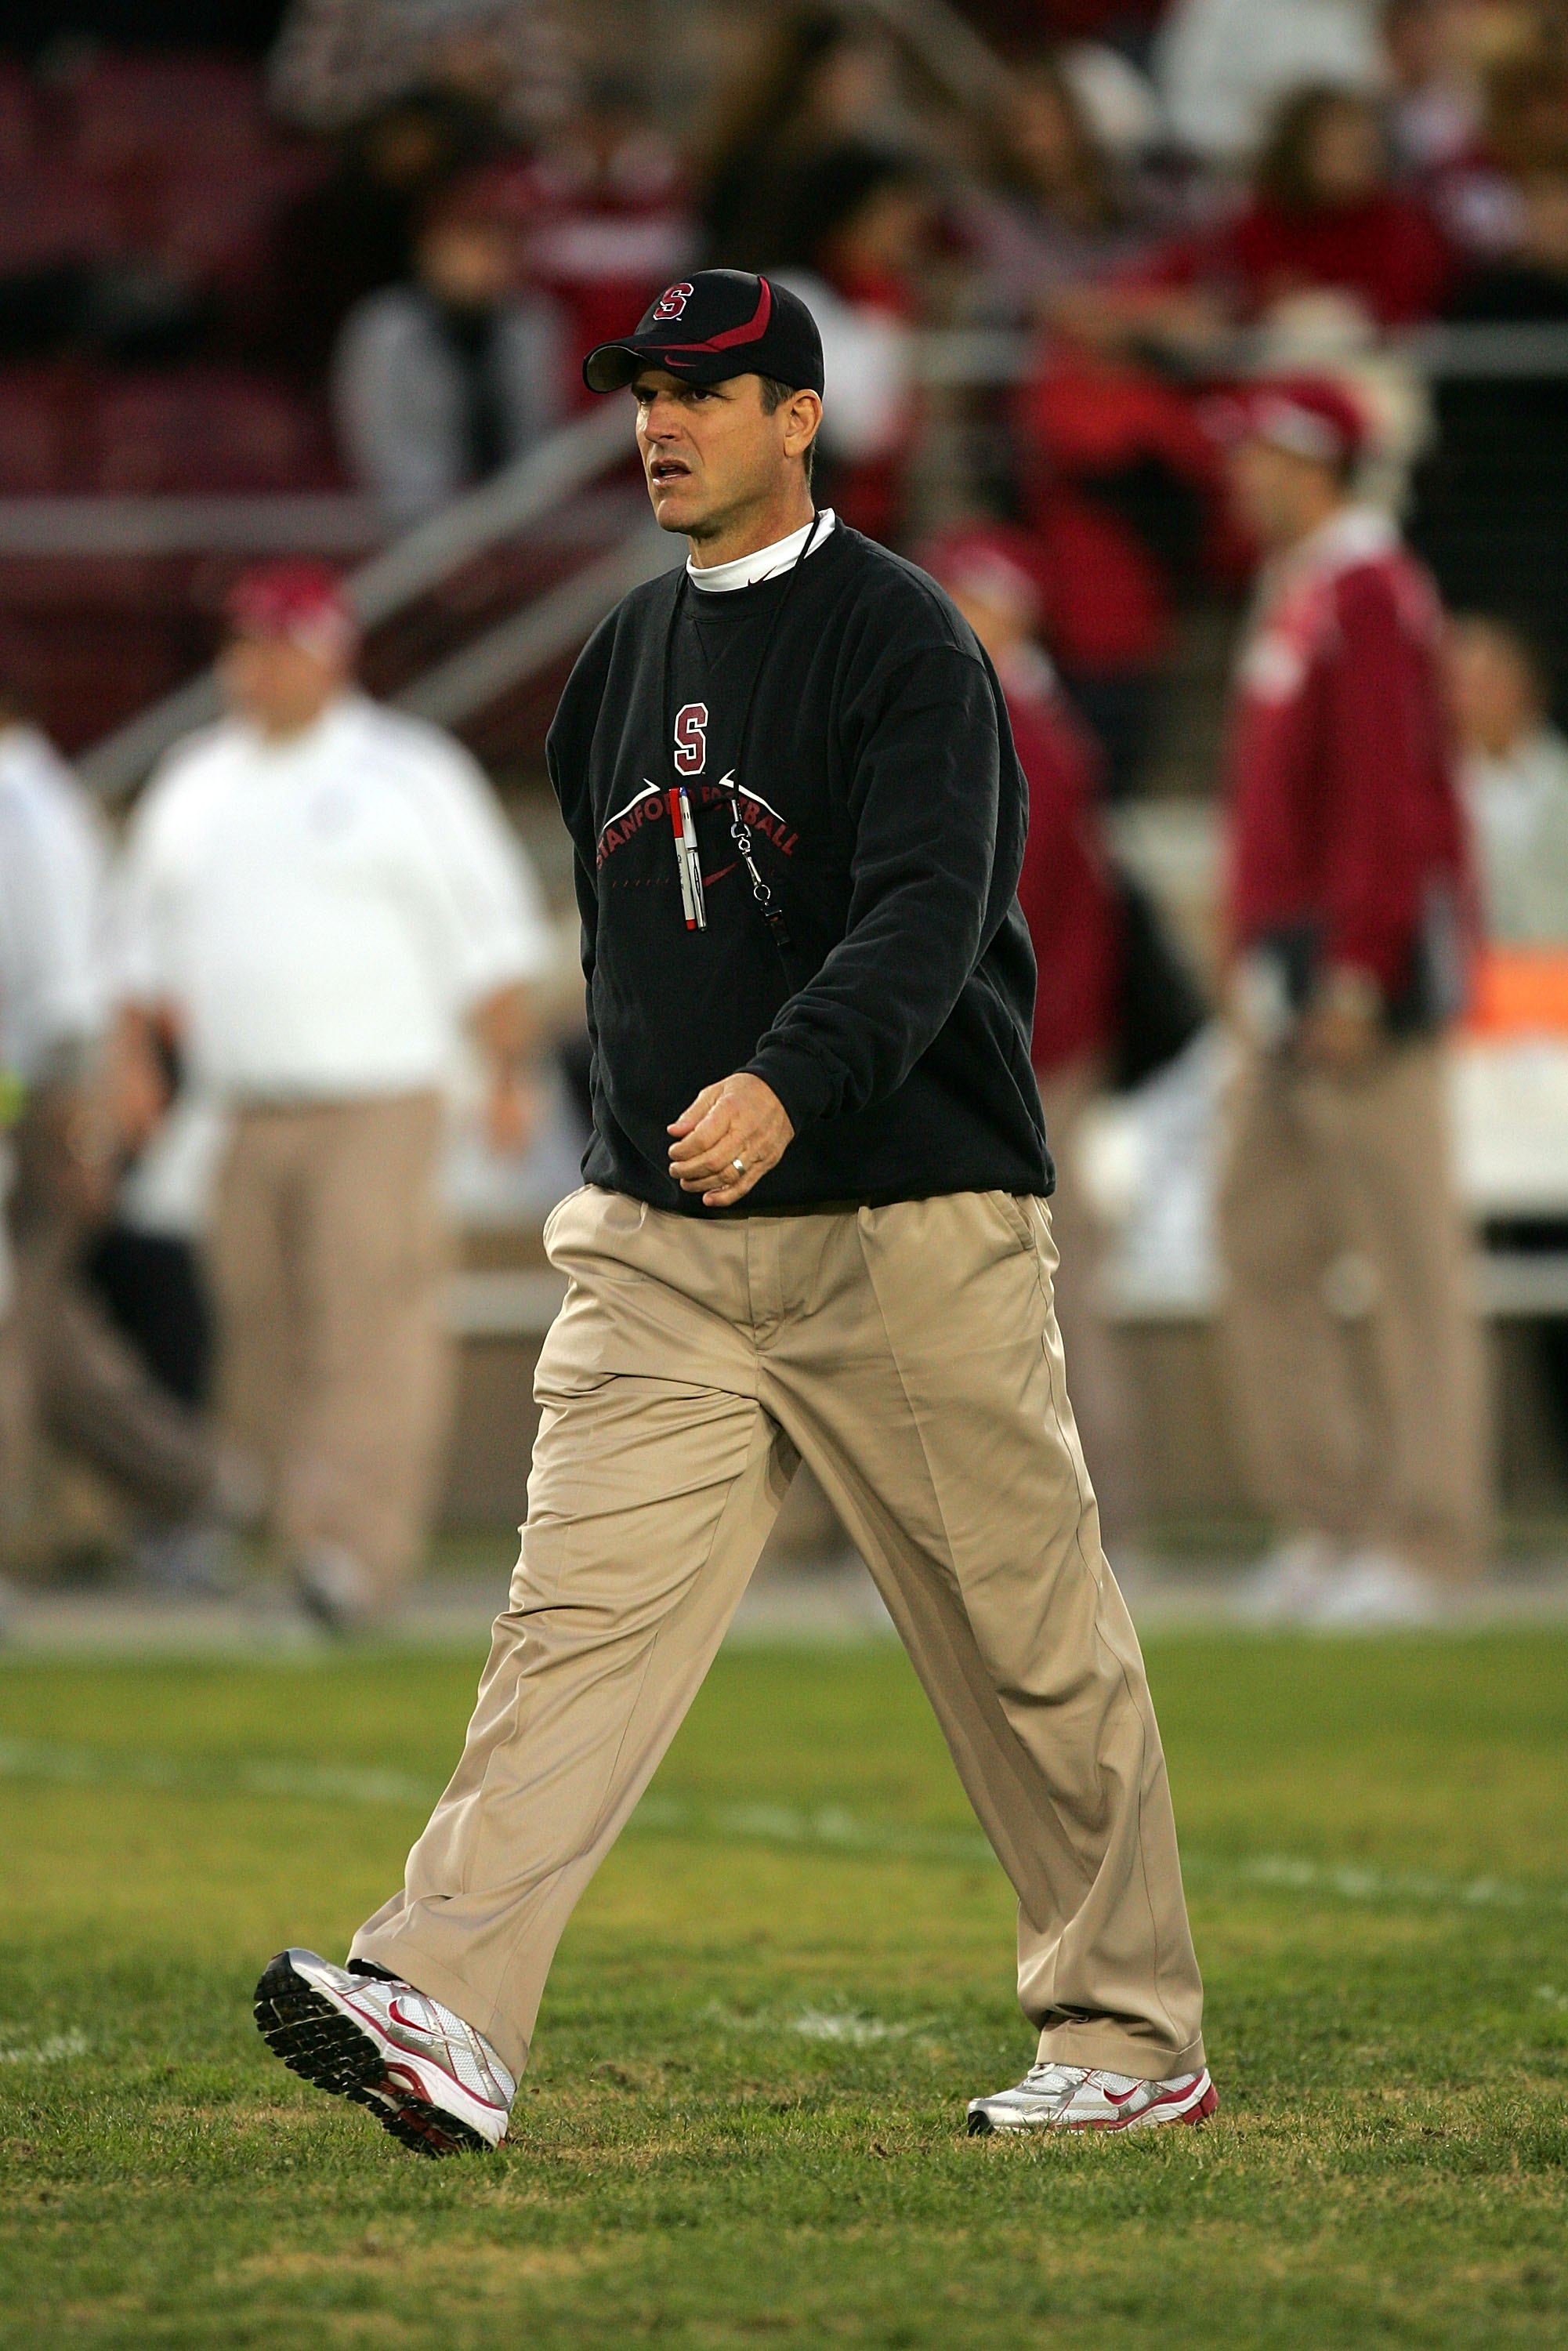 PALO ALTO, CA - NOVEMBER 28:  Stanford Cardinal head coach Jim Harbaugh walks off the field after warm ups before their game against the Notre Dame Fighting Irish at Stanford Stadium on November 28, 2009 in Palo Alto, California.  (Photo by Ezra Shaw/Gett